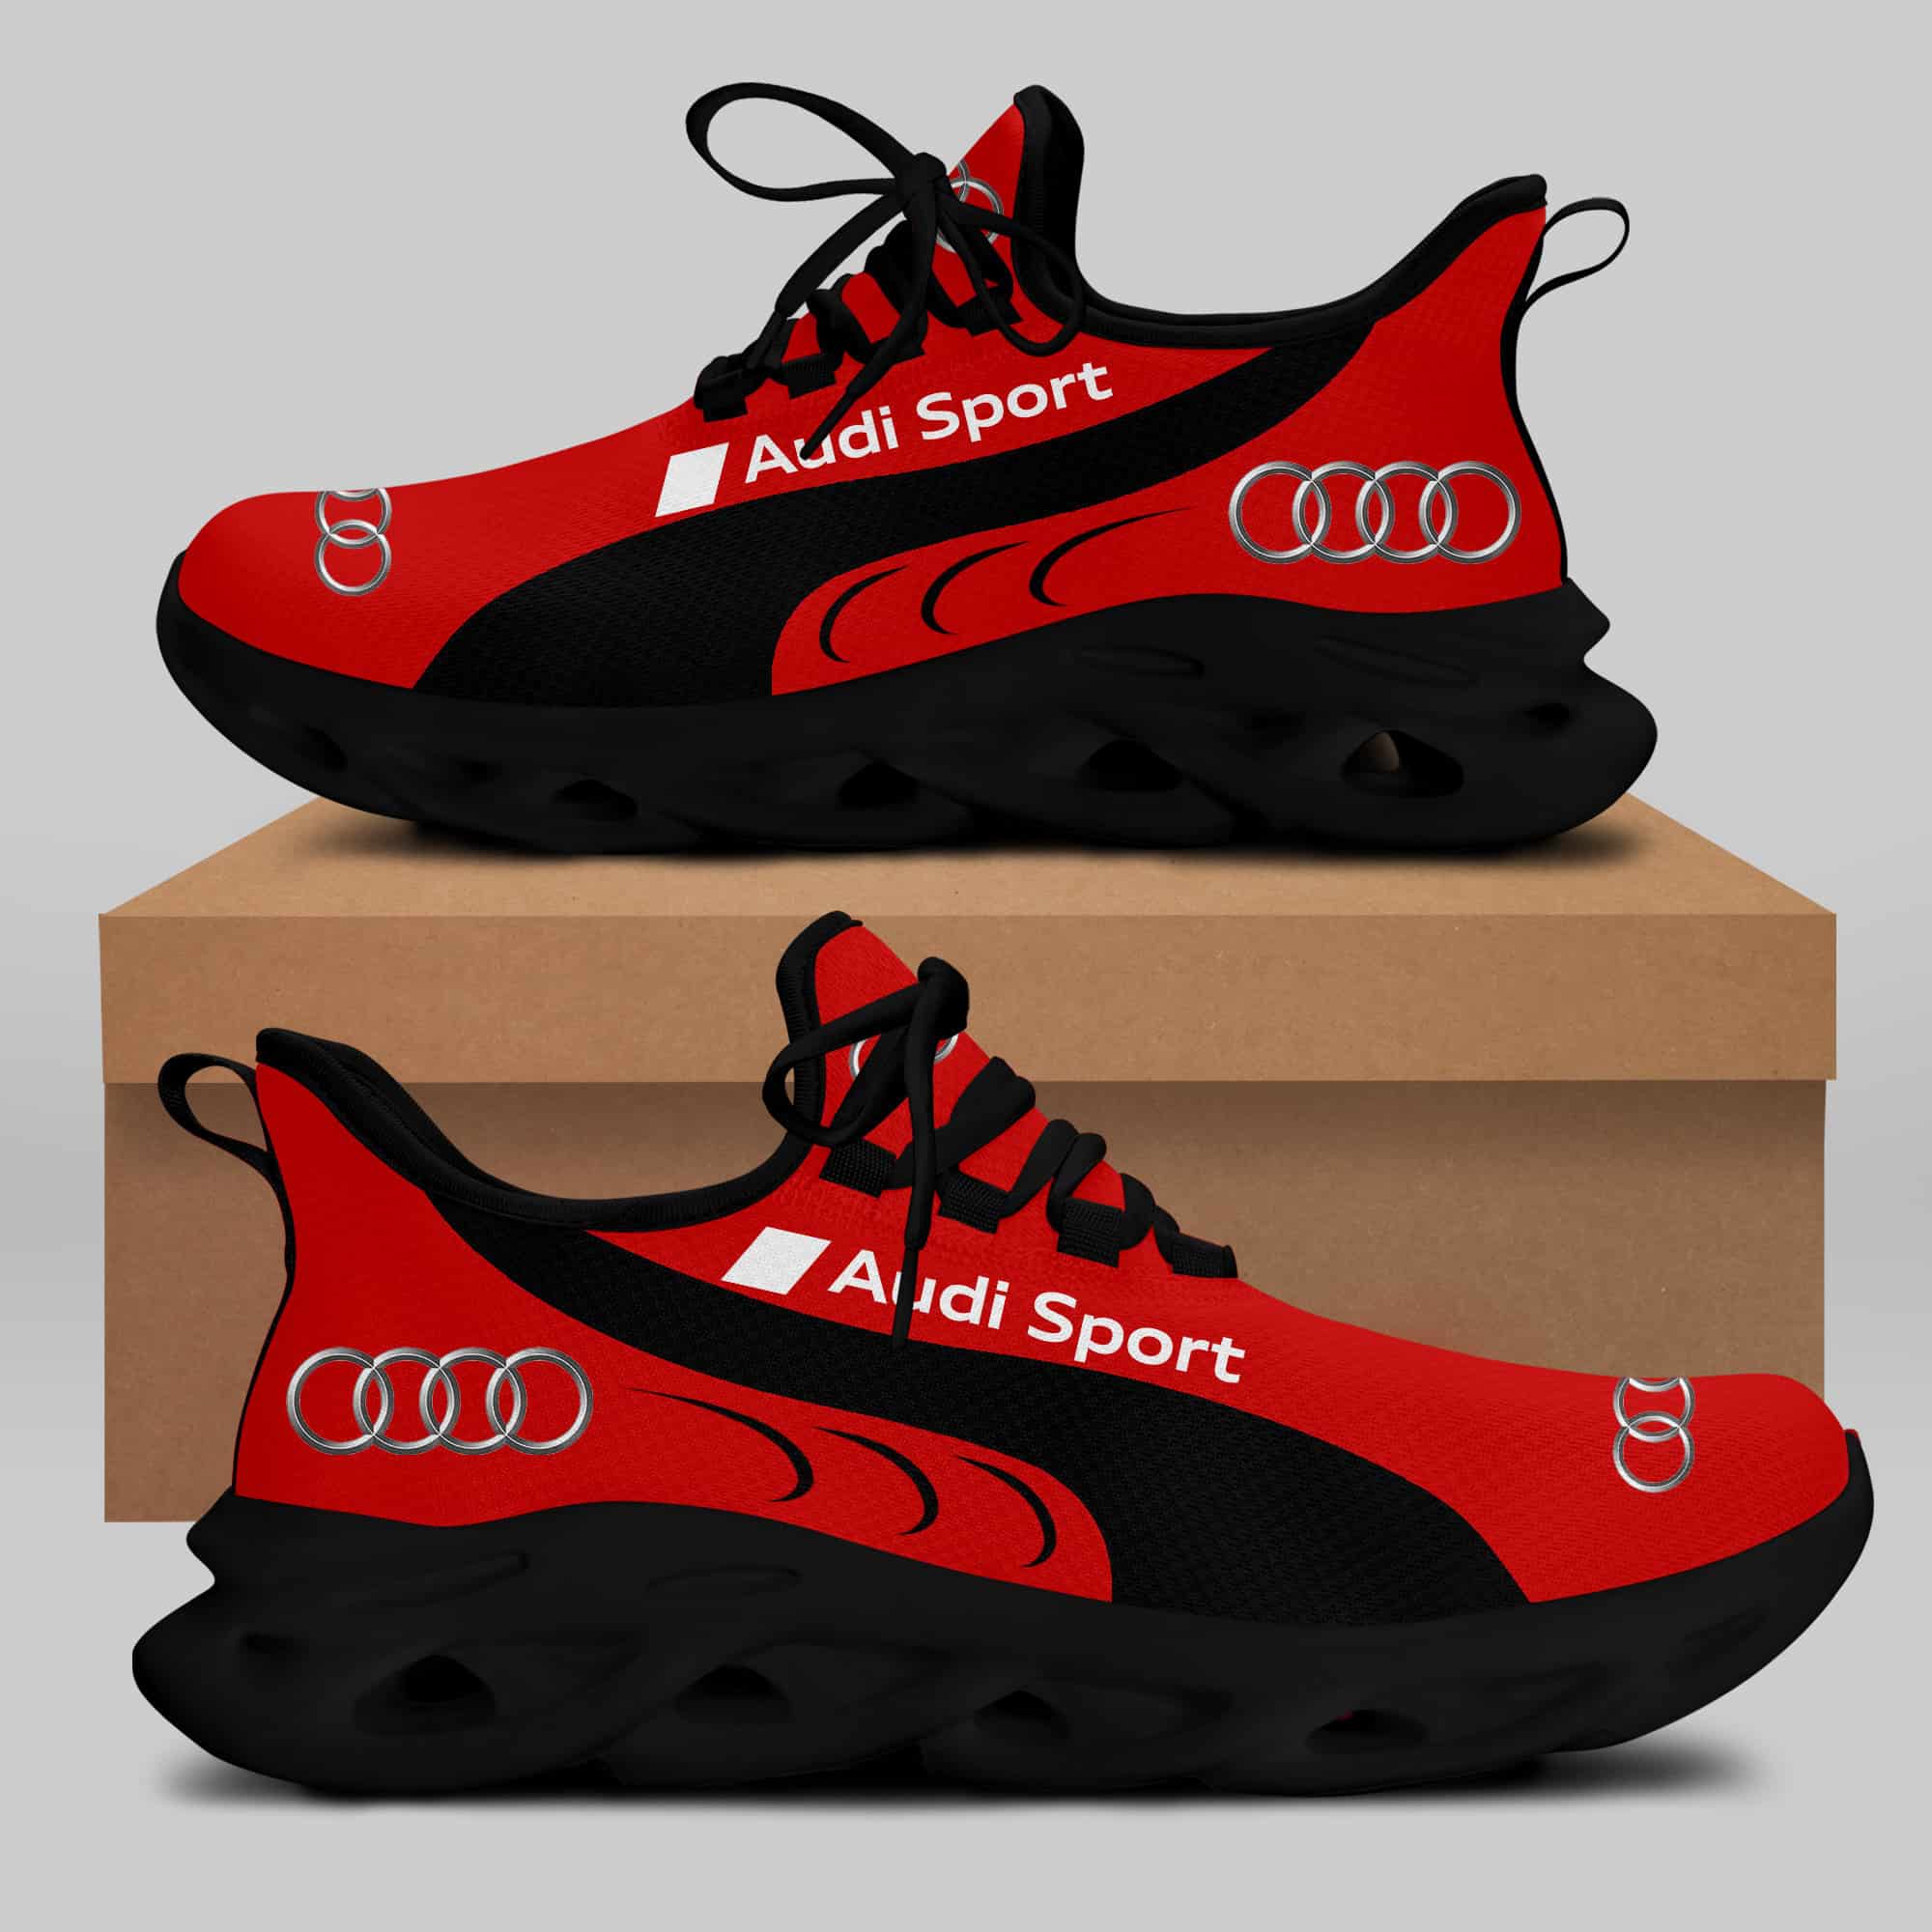 Audi Sport Running Shoes Max Soul Shoes Sneakers Ver 30 1